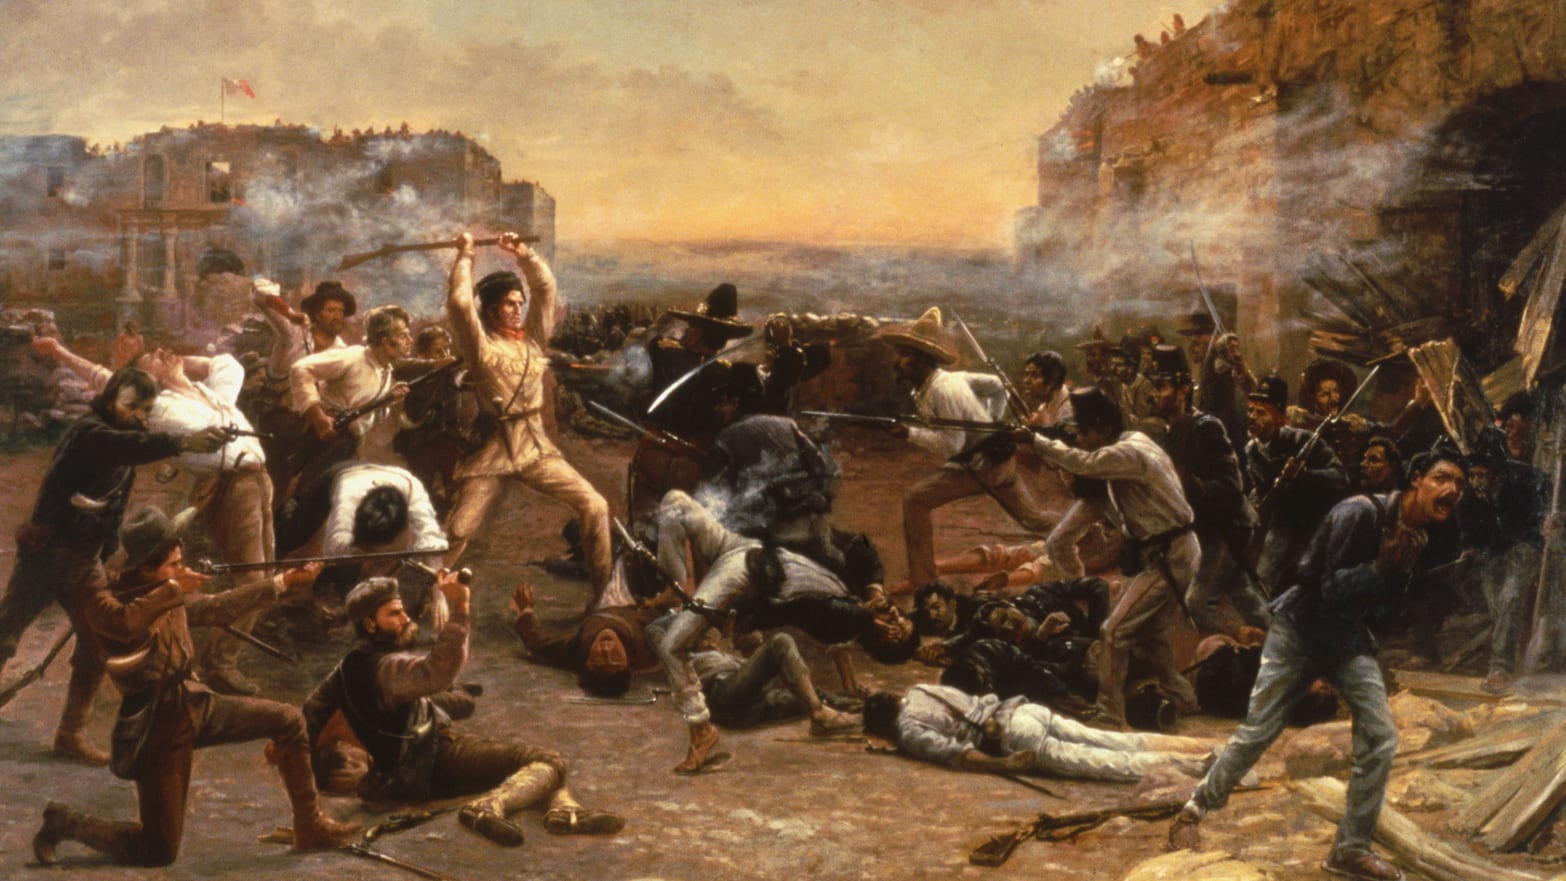 Forget the Alamo Book Trashes Texas Beloved Origin Myth pic